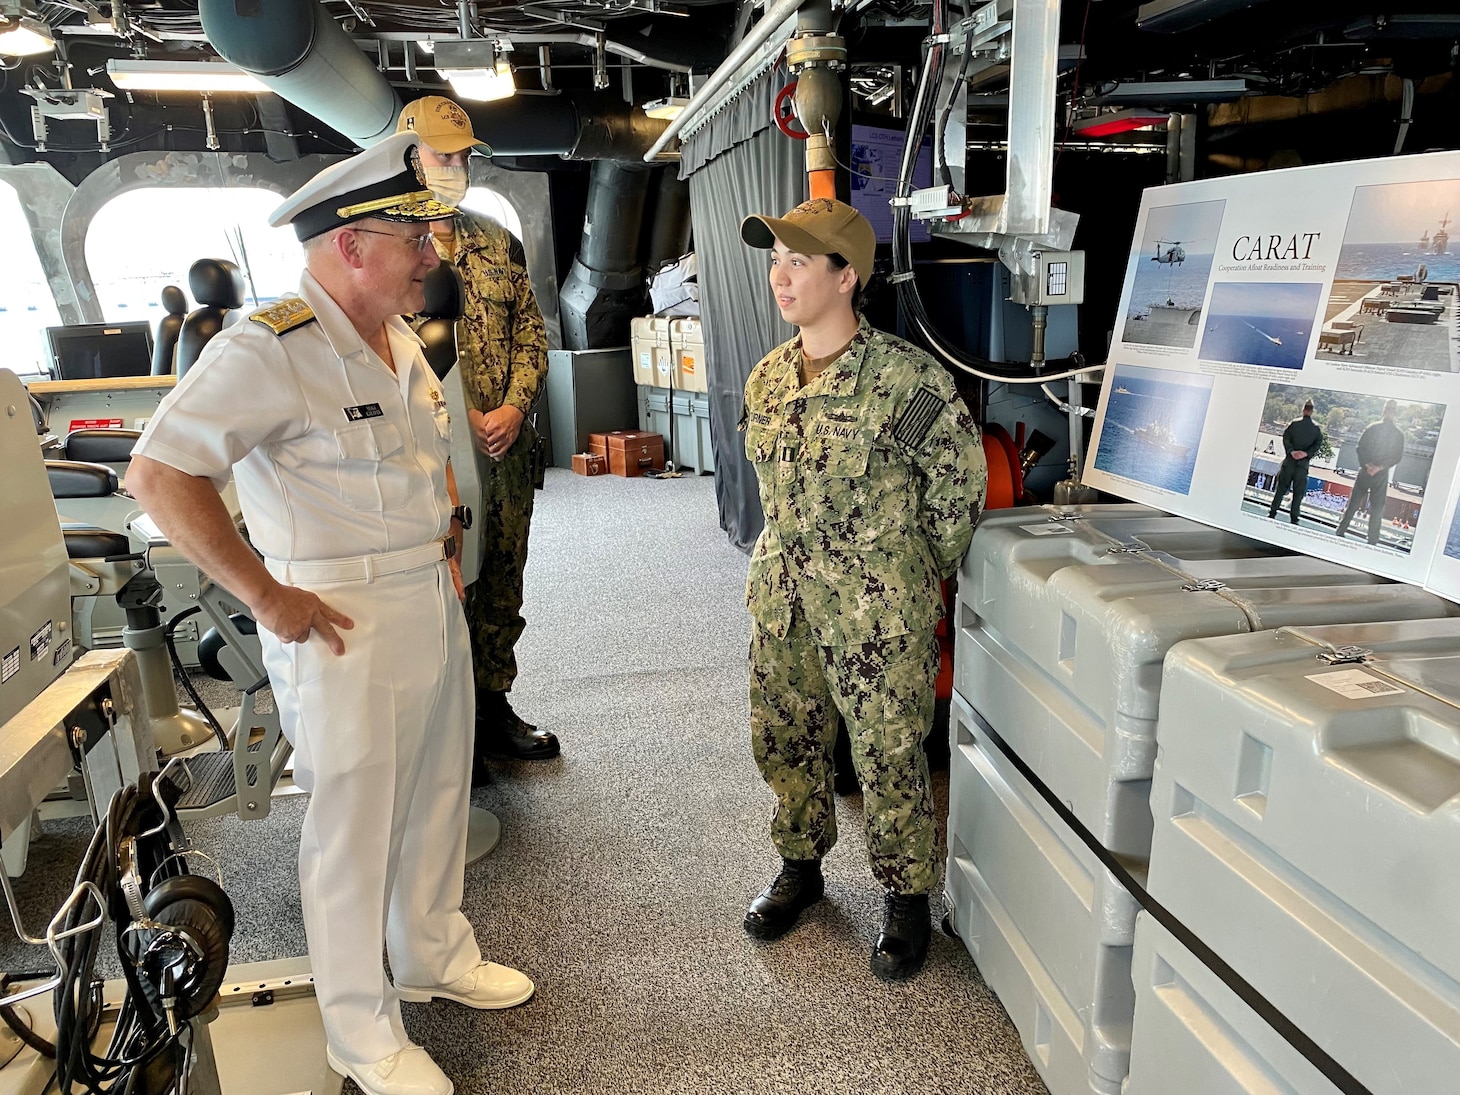 CNO Gilday speaks to a Sailor in front of a display.